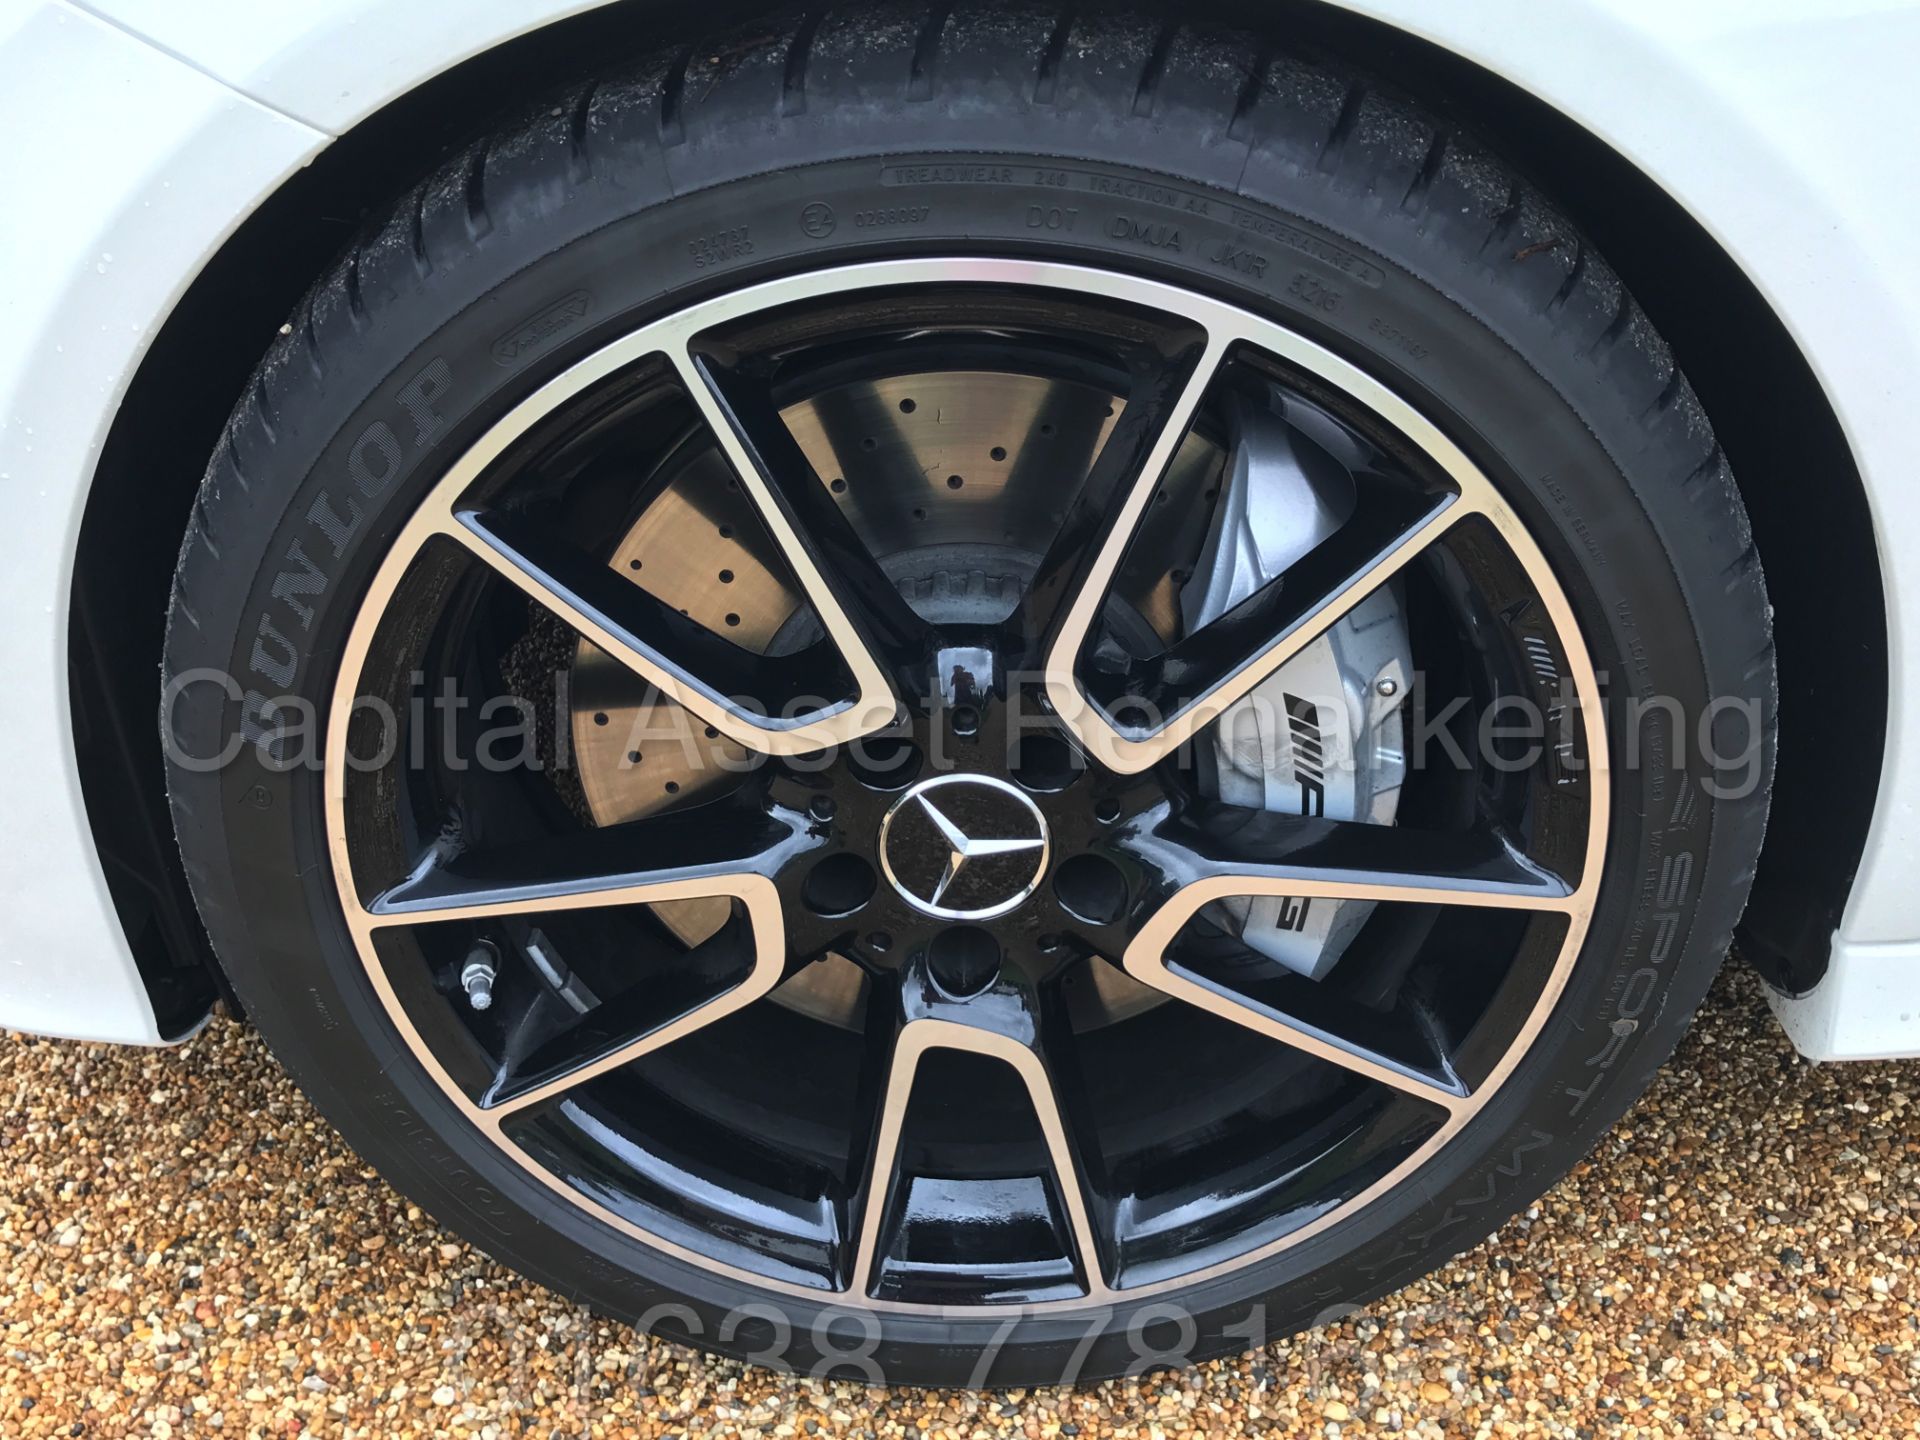 MEREDES-BENZ C43 AMG PREMIUM '4 MATIC' COUPE (2017) '9-G AUTO - LEATHER - SAT NAV' **FULLY LOADED** - Image 23 of 57